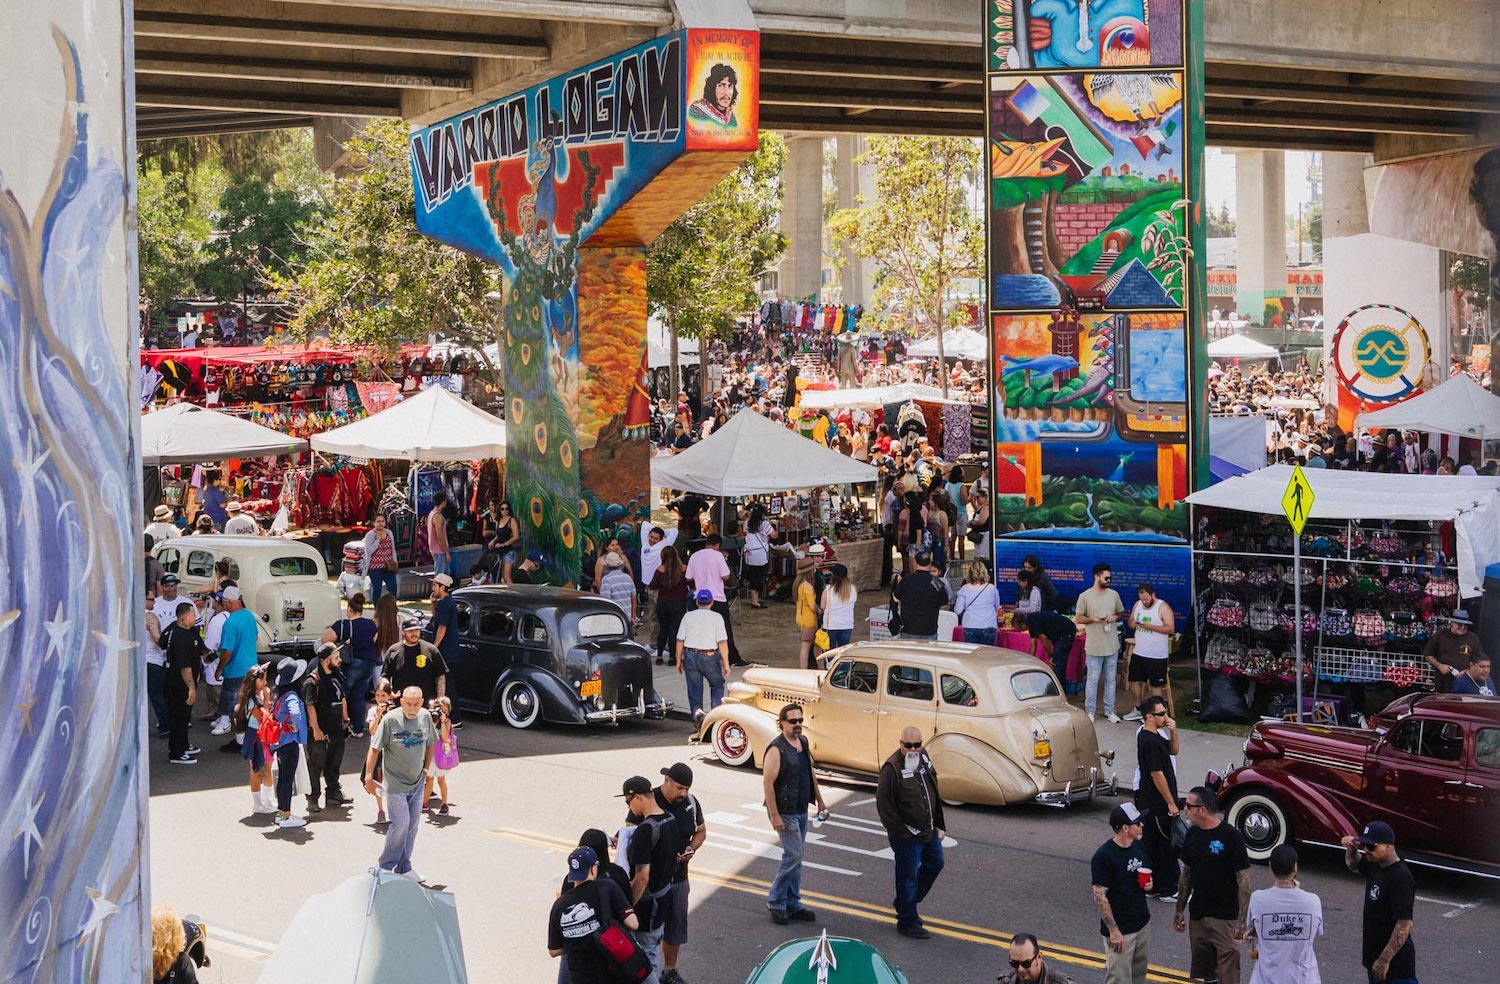 A local San Diego community at the historic Chicano Park in Barrio Logan home to various Mexican murals and culture